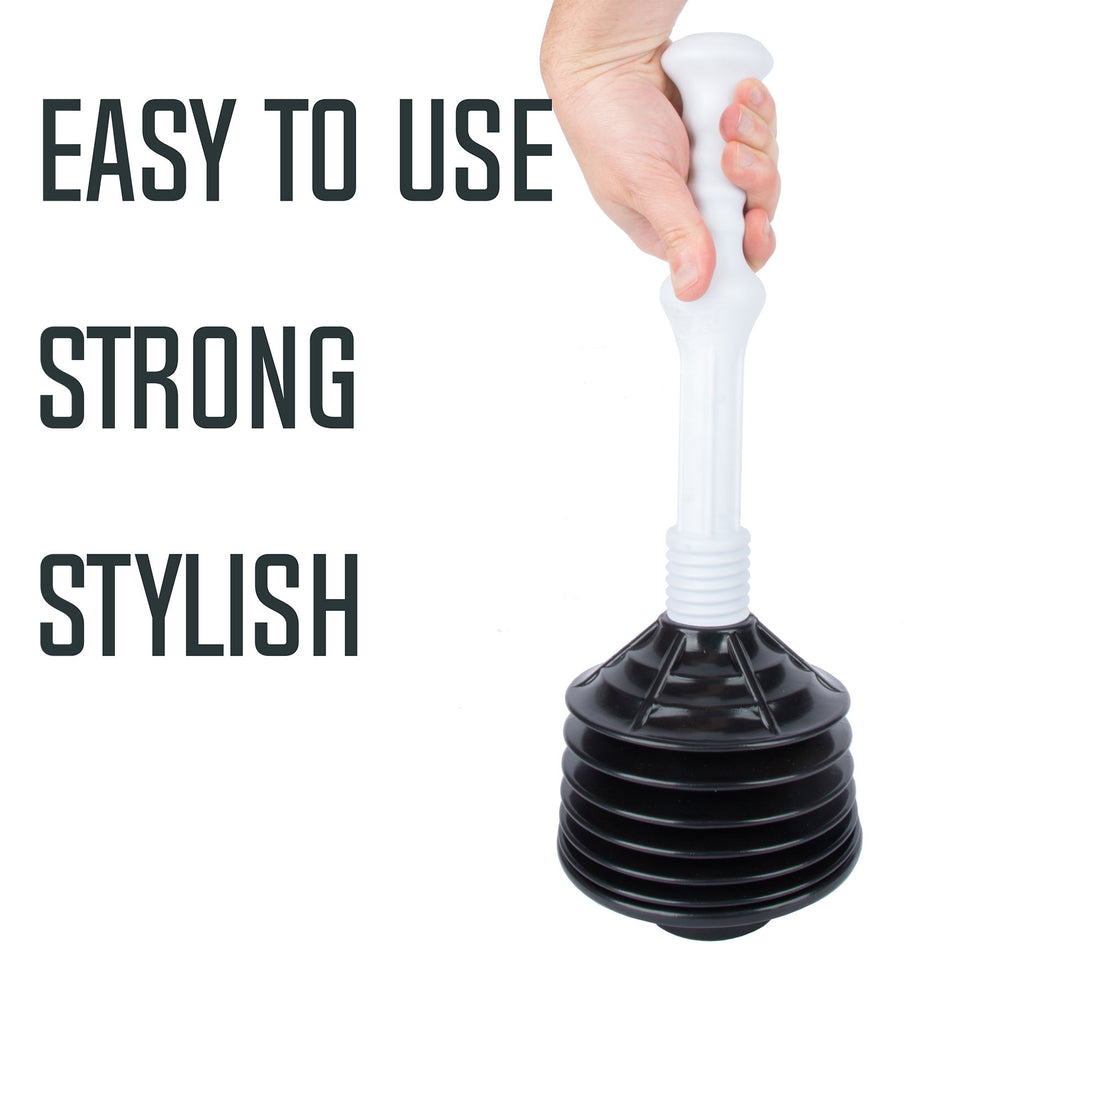 Accordion Plunger can be used on sinks and tubs. #DIY #apartment #saf